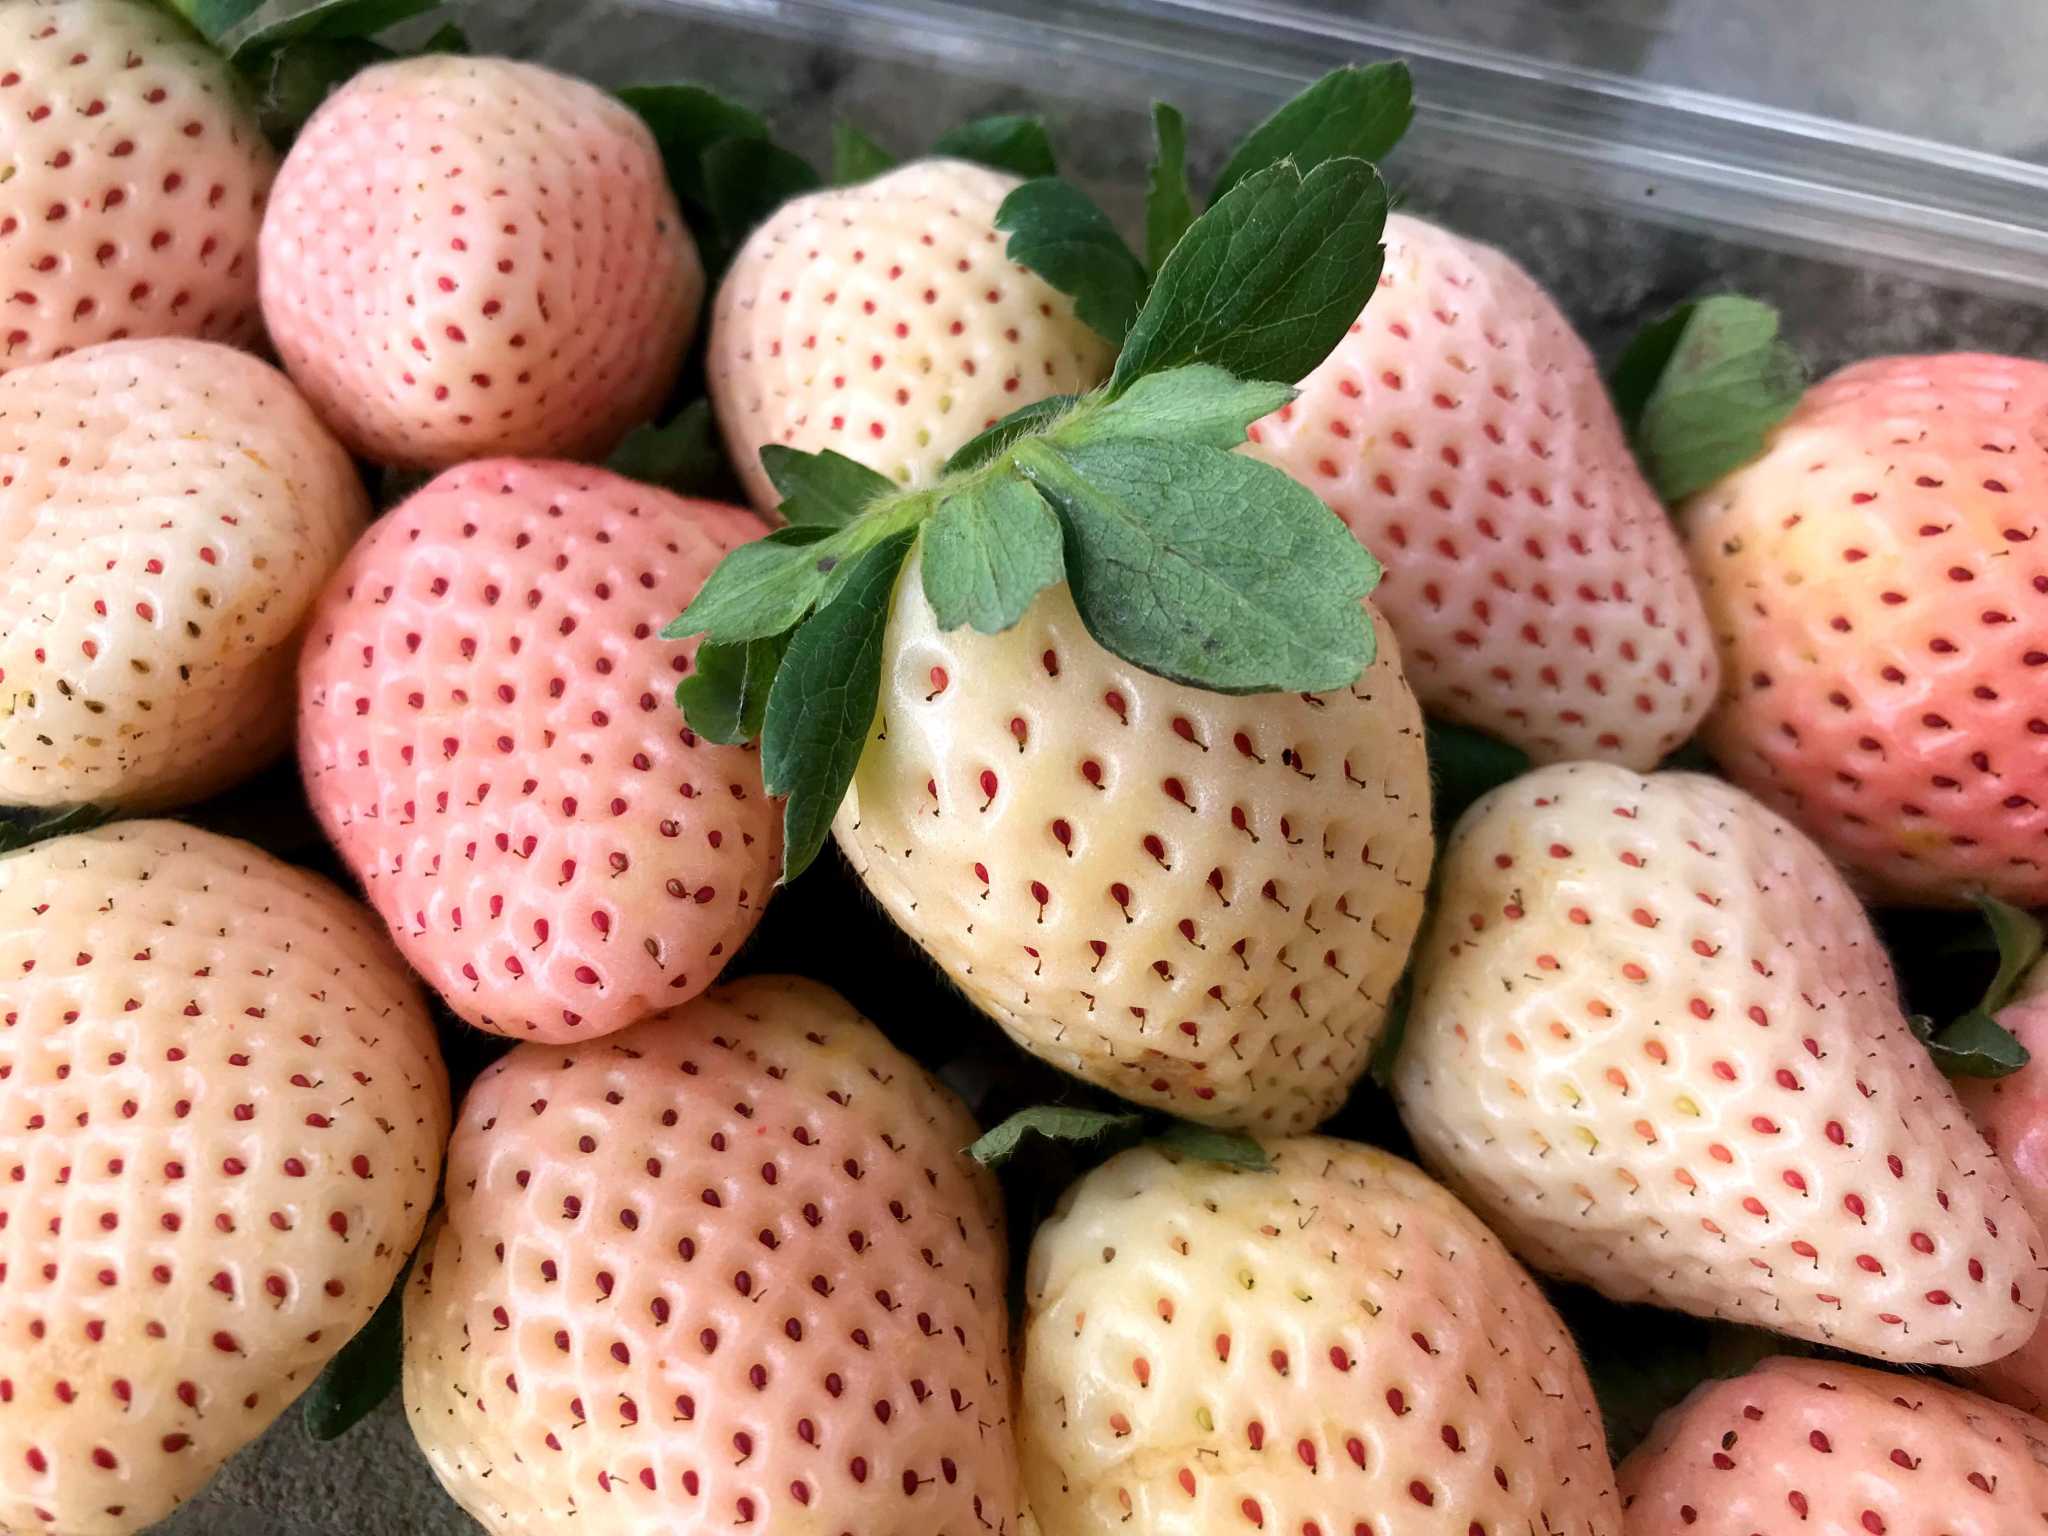 What Are Pineberries?